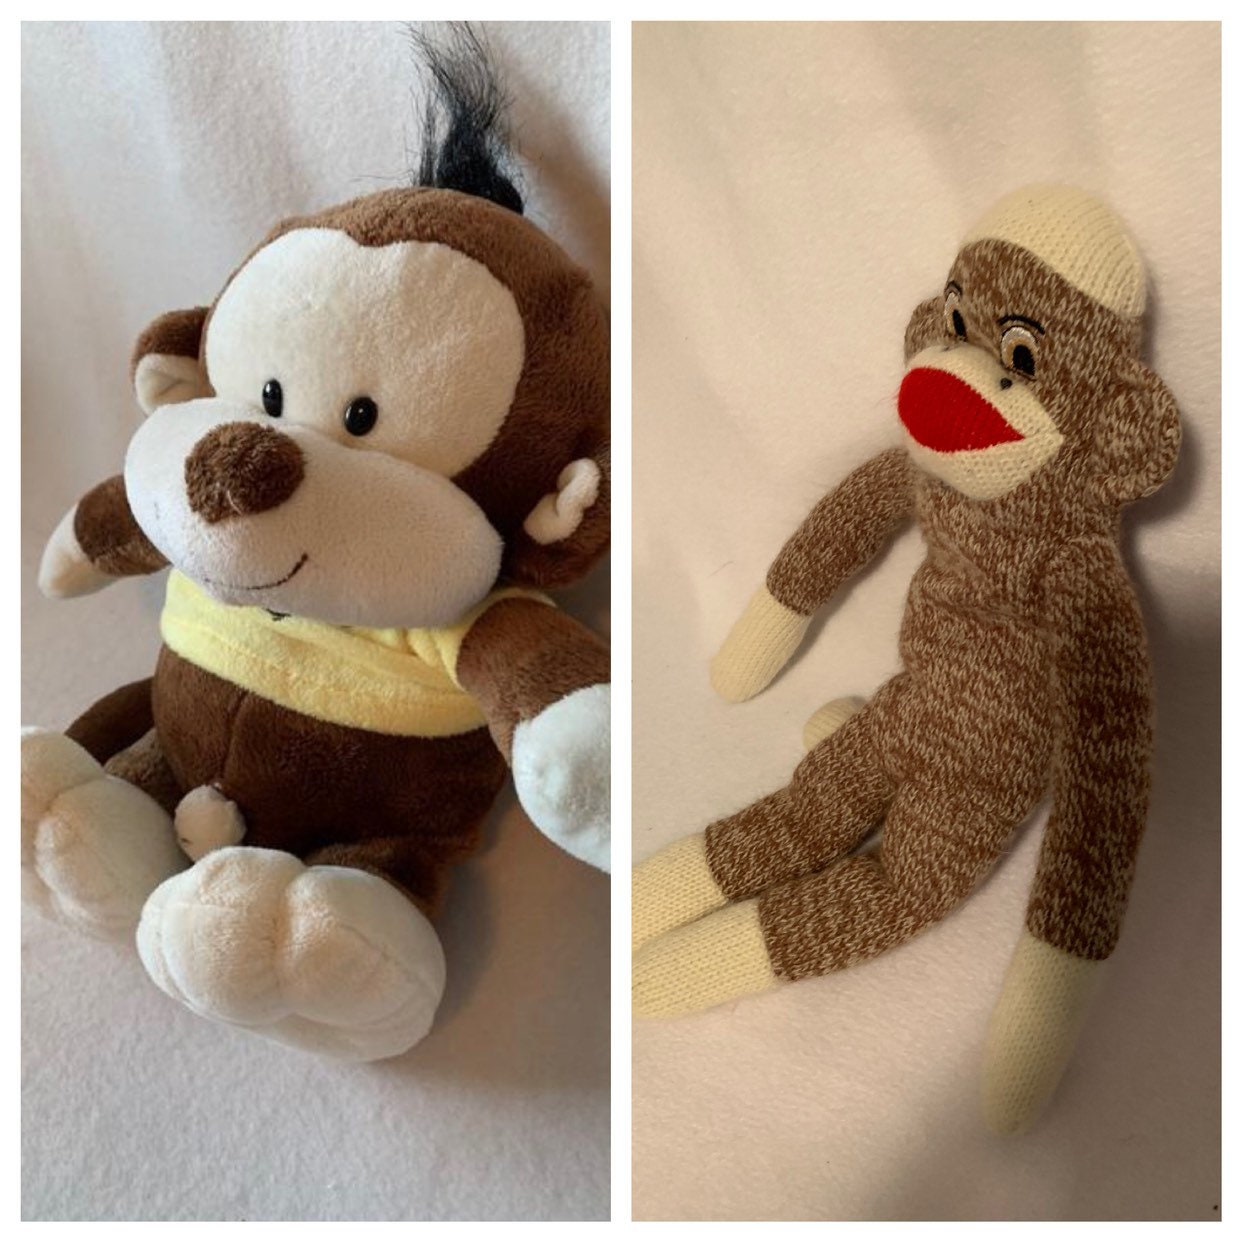 sensory toy weighted block Weighted stuffed animal 3 lbs Digitized Monkey 